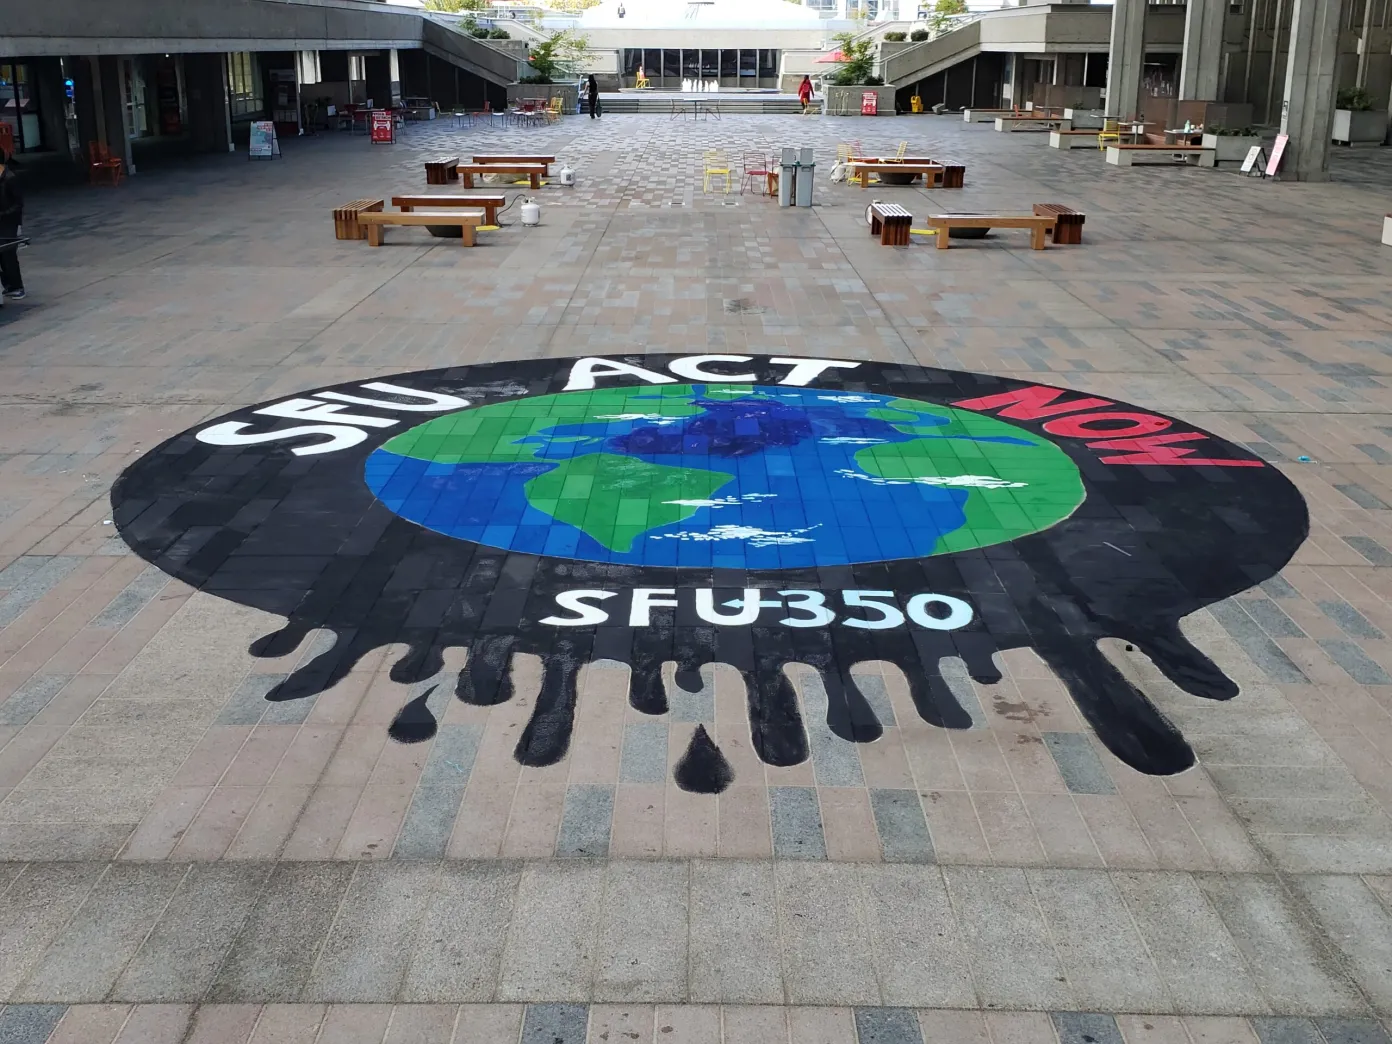 A mural of the world surrounded by oil with the text “SFU act now SFU350” written around it painted on the group